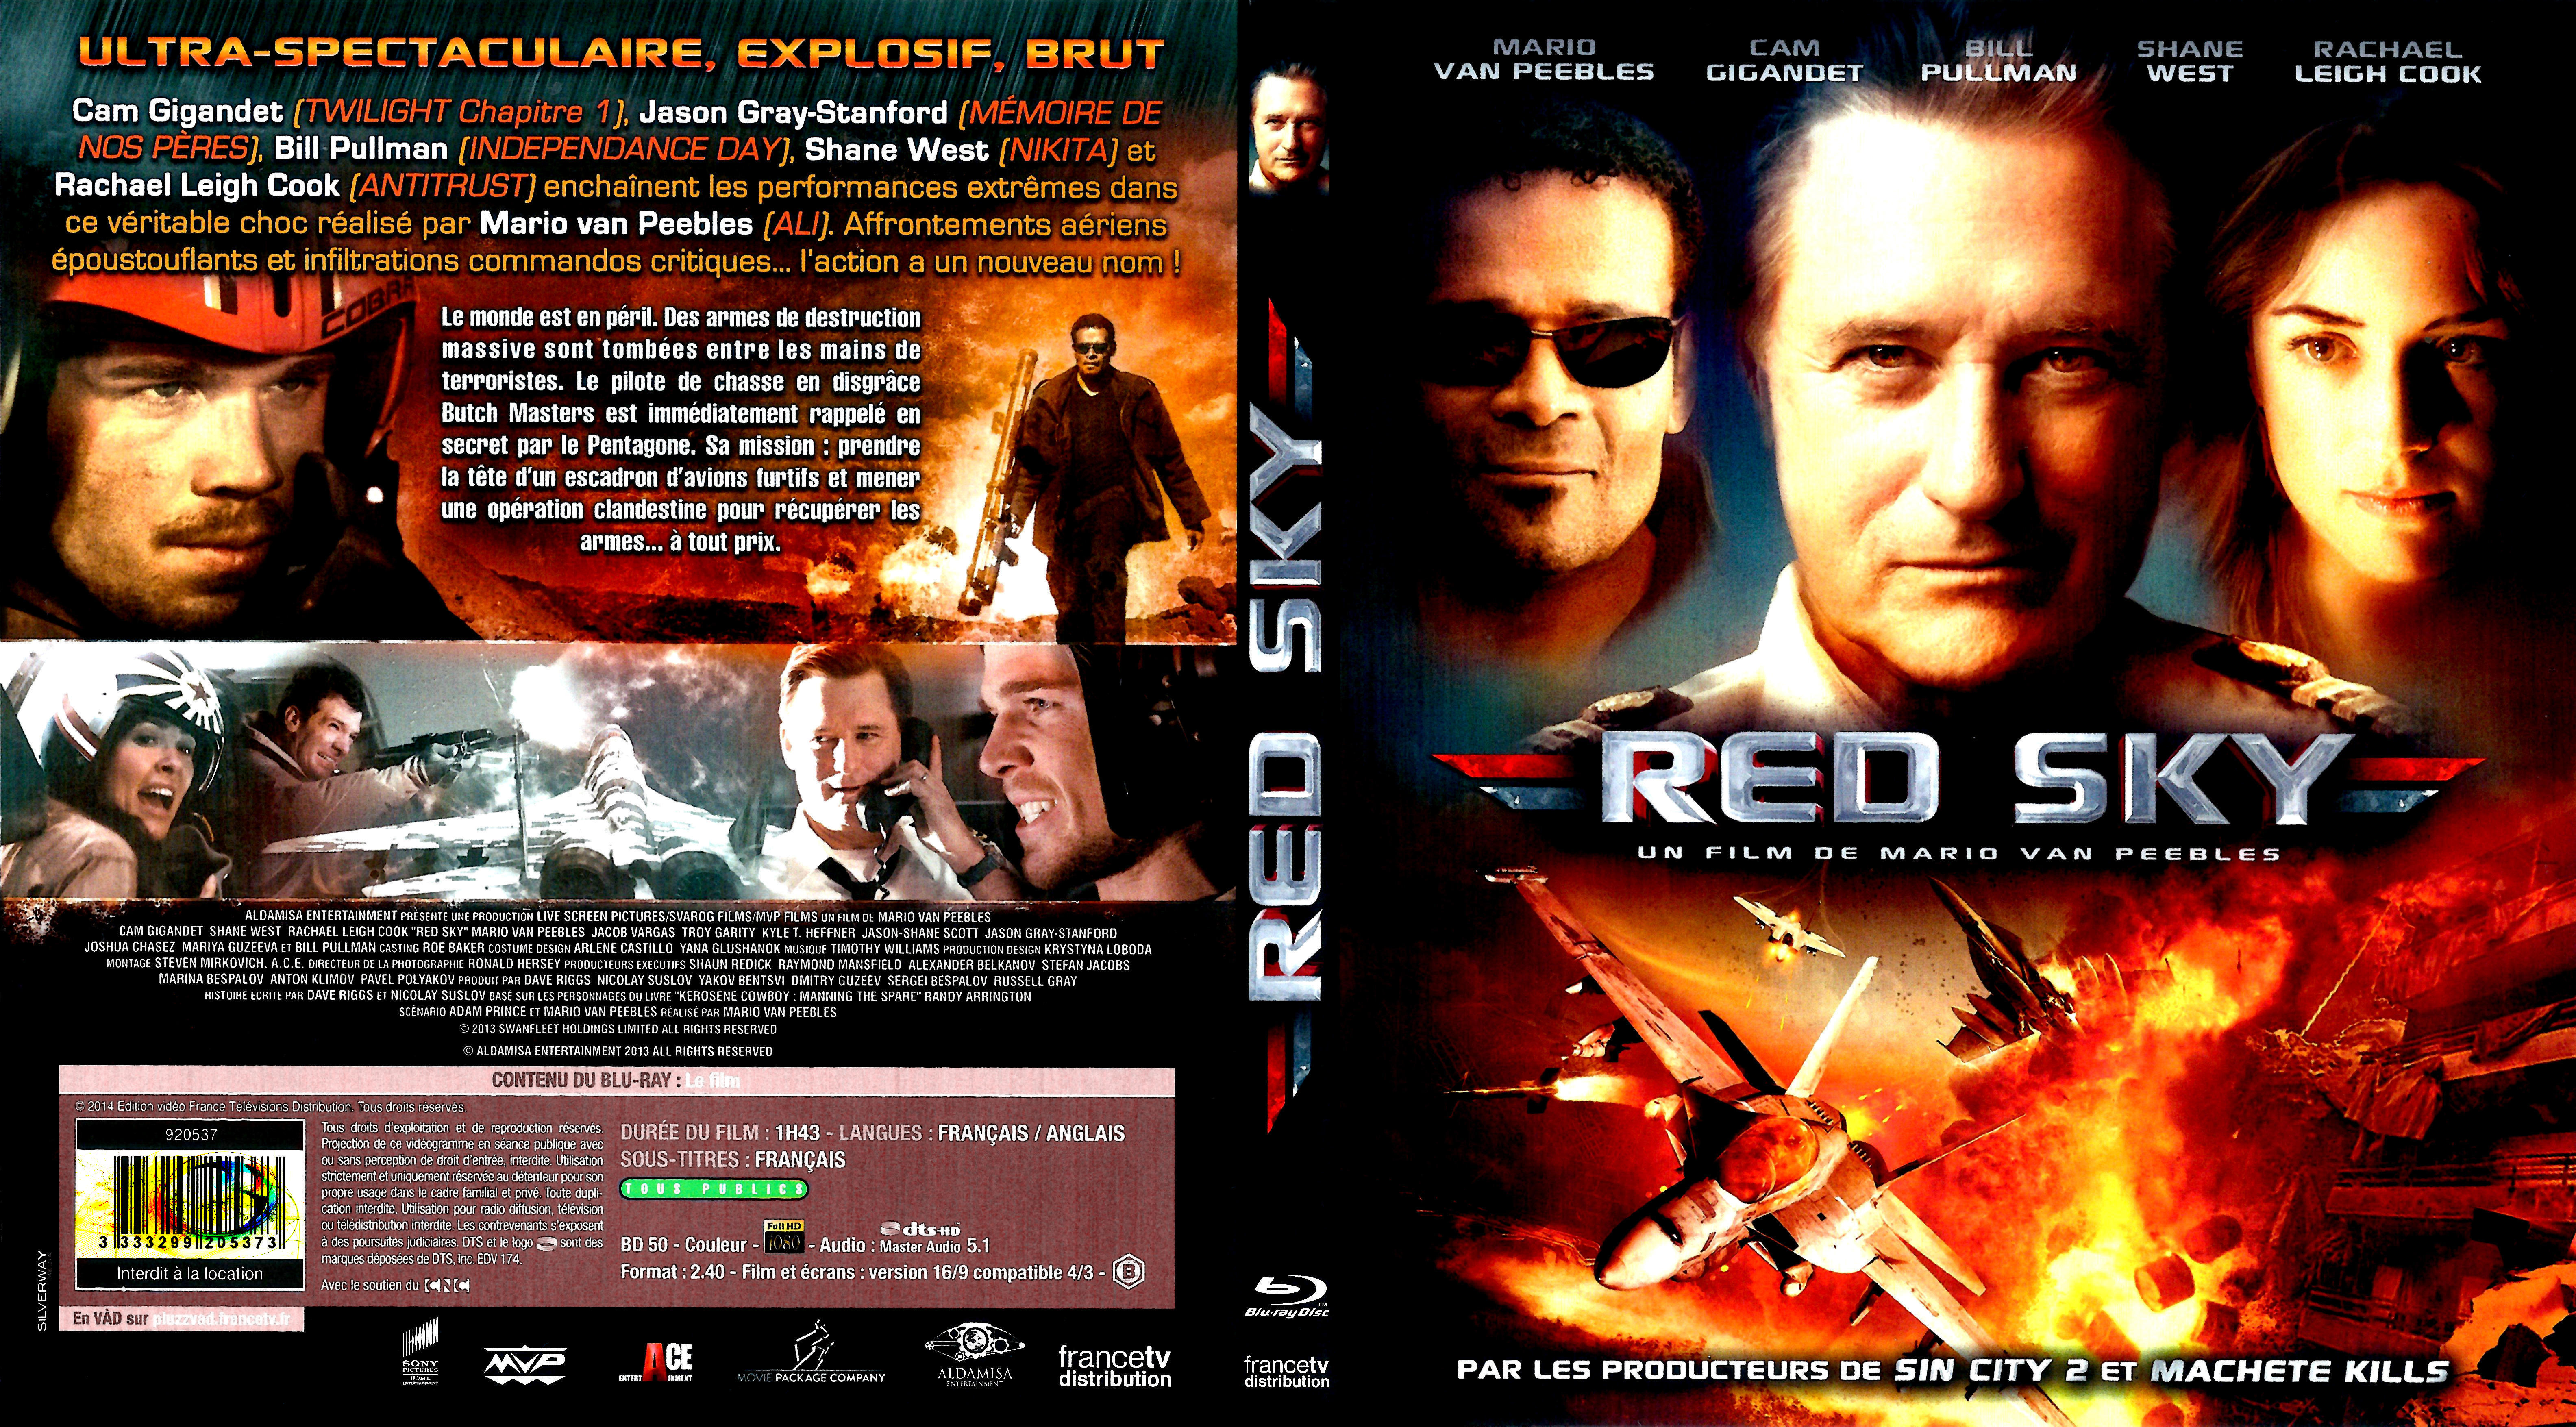 Jaquette DVD Red sky (BLU-RAY)